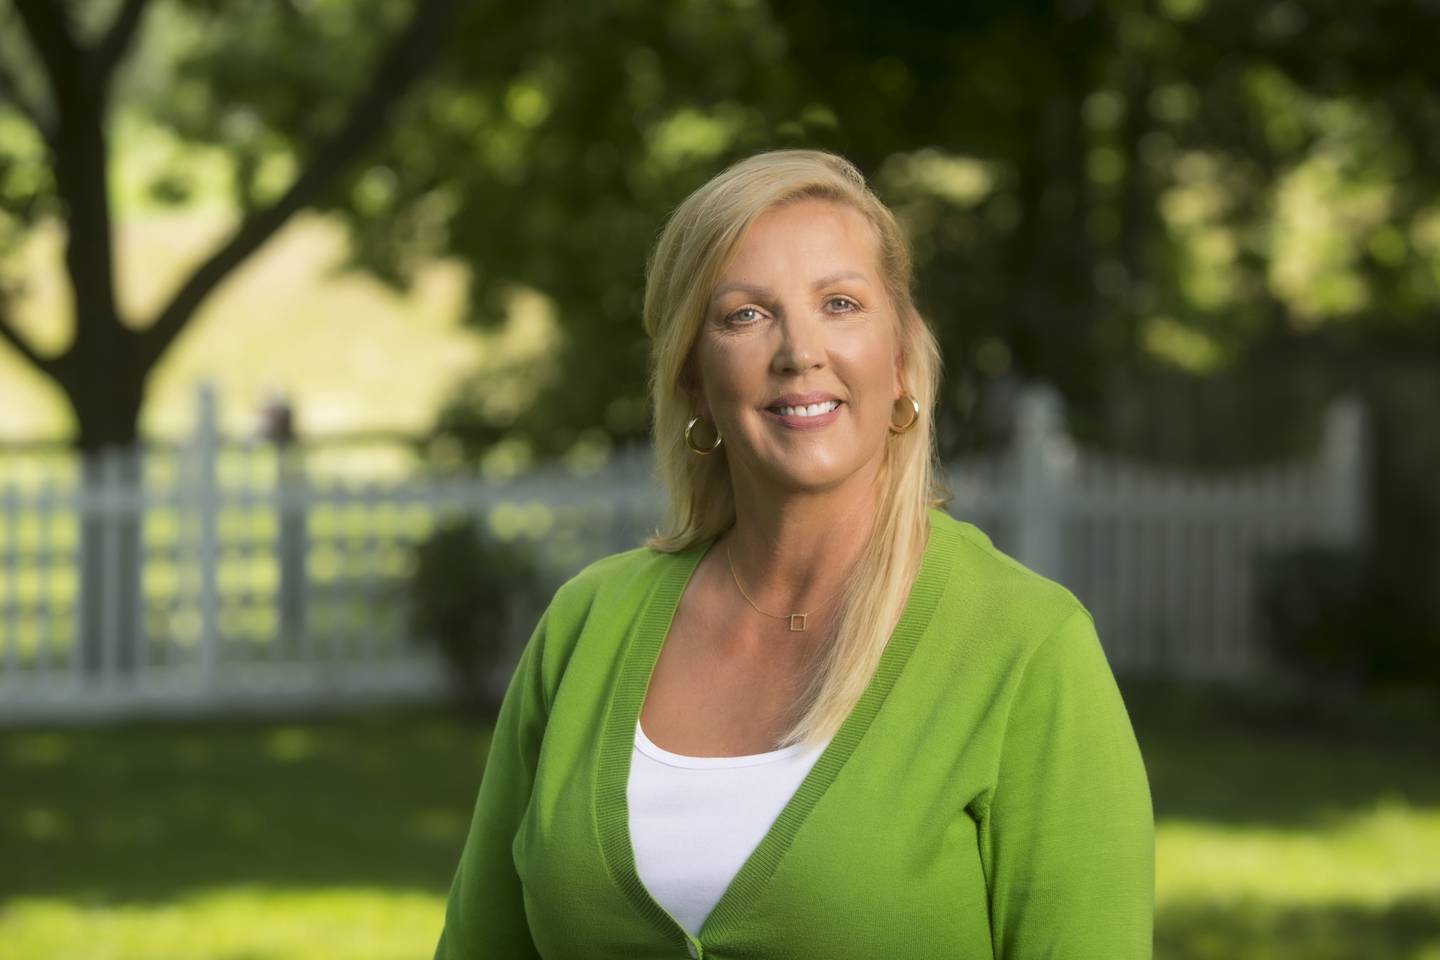 State Sen. Sue Rezin (R-Morris) announced her campaign for re-election to the state senate in the 38th District.